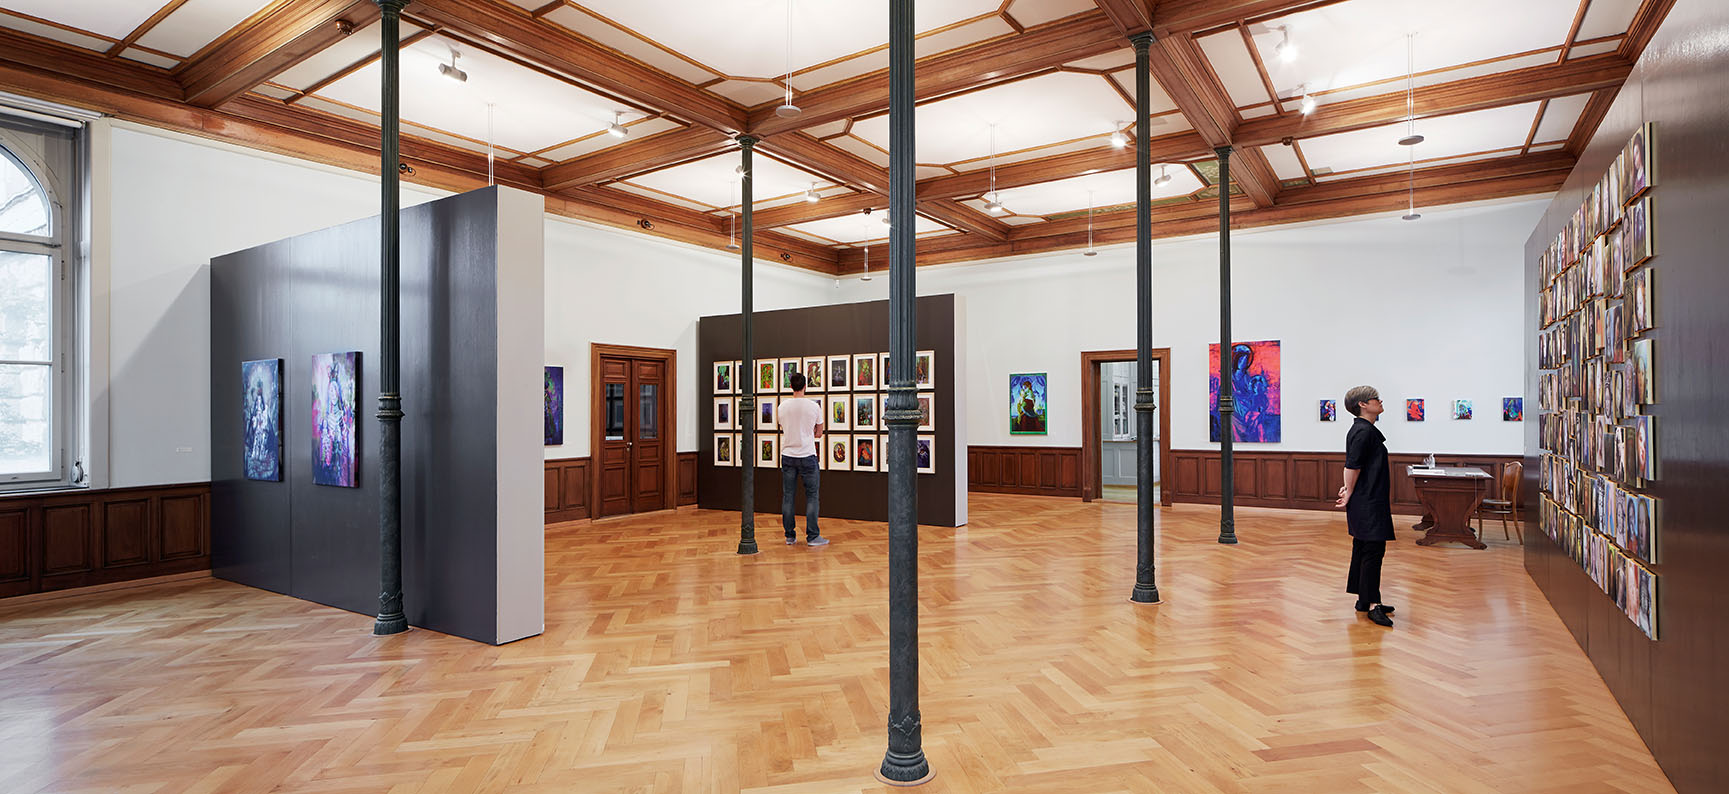 Exhibition space of ETH Zurich’s Collection of Prints and Drawings 2014 © ETH library / Frank Blaser